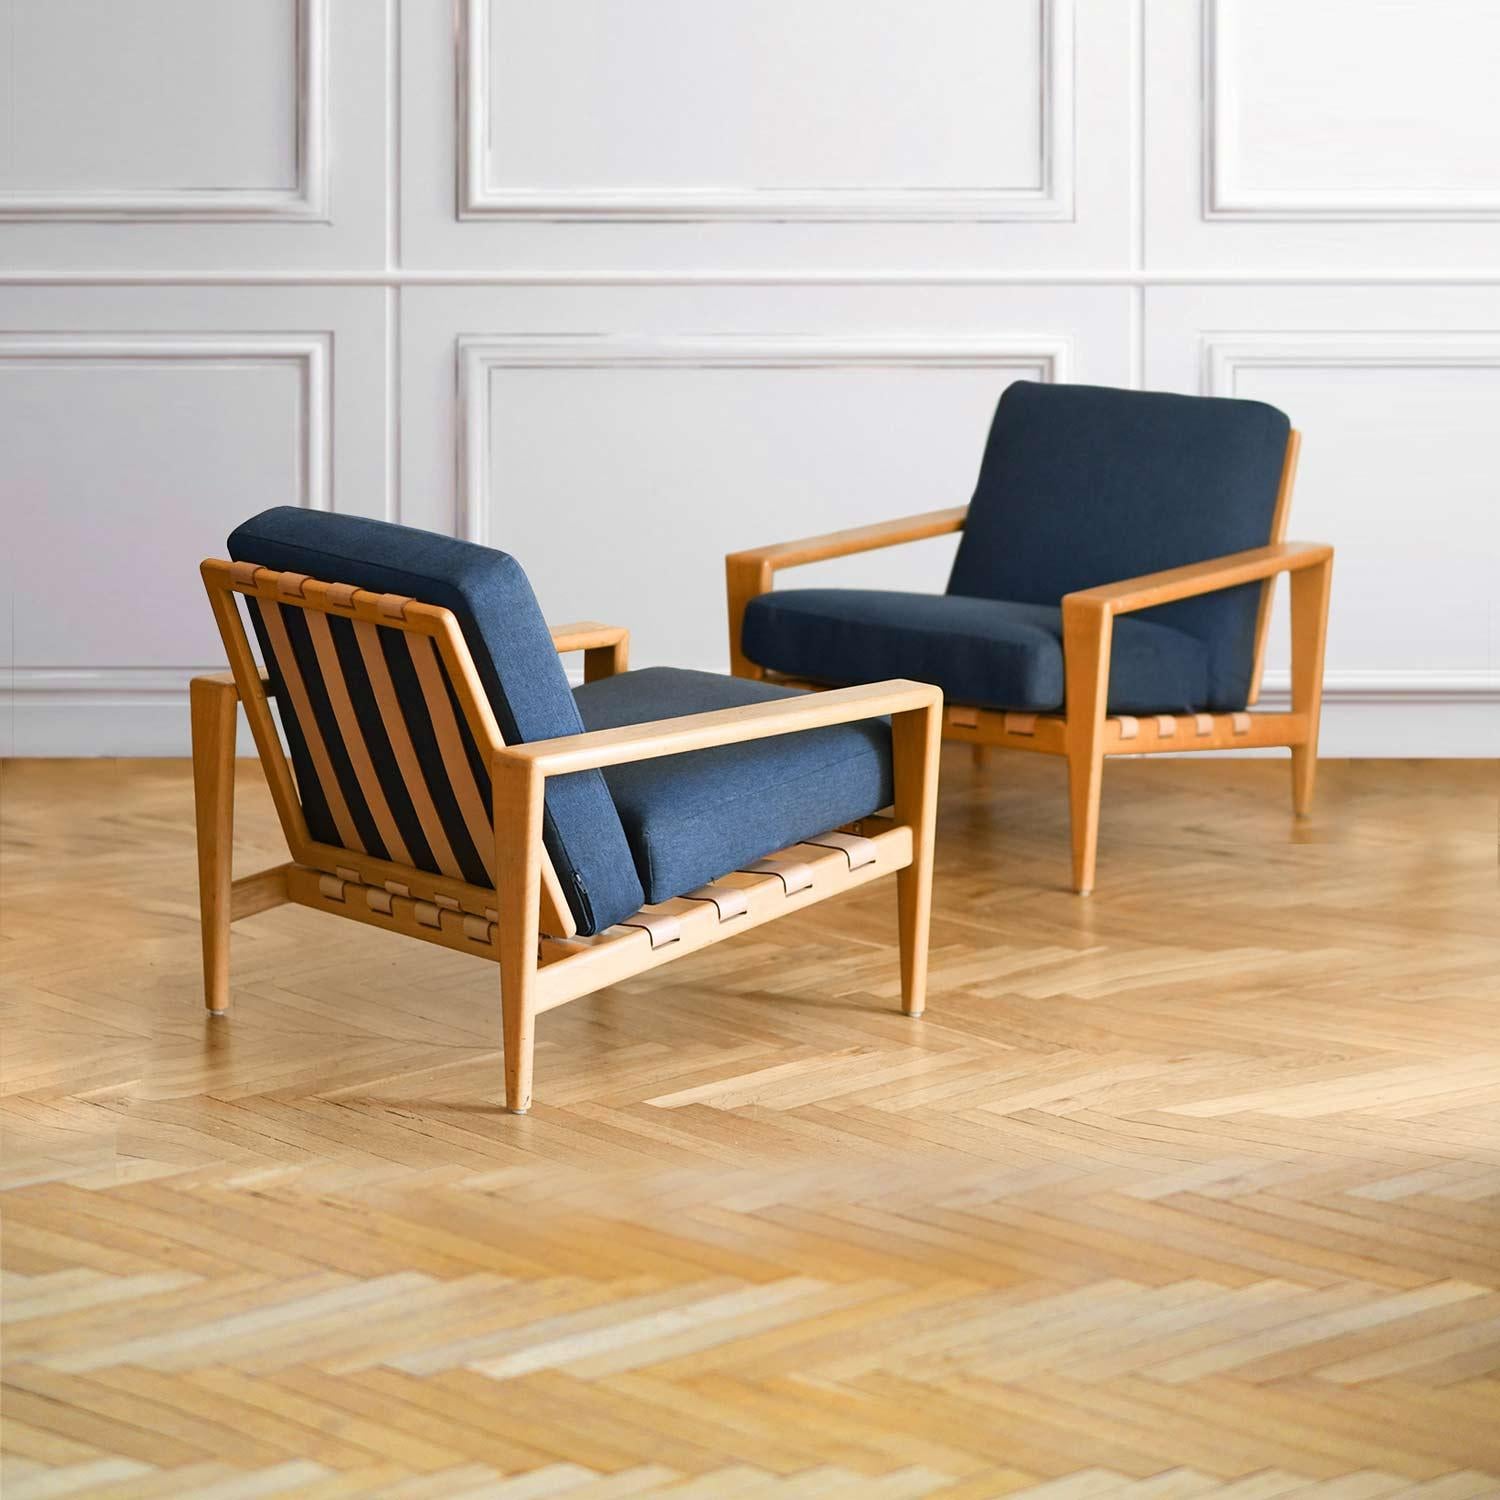 Pair of Svante Skogh 1957 “Bodo” armchairs in Swedish oak
PRODUCT DETAILS
Dimensions: 75w x 72h x 62dcm
Materials: oak wood, fabric
Production: Saffle Mobler 1957
The coordinated sofa can be purchased separately.